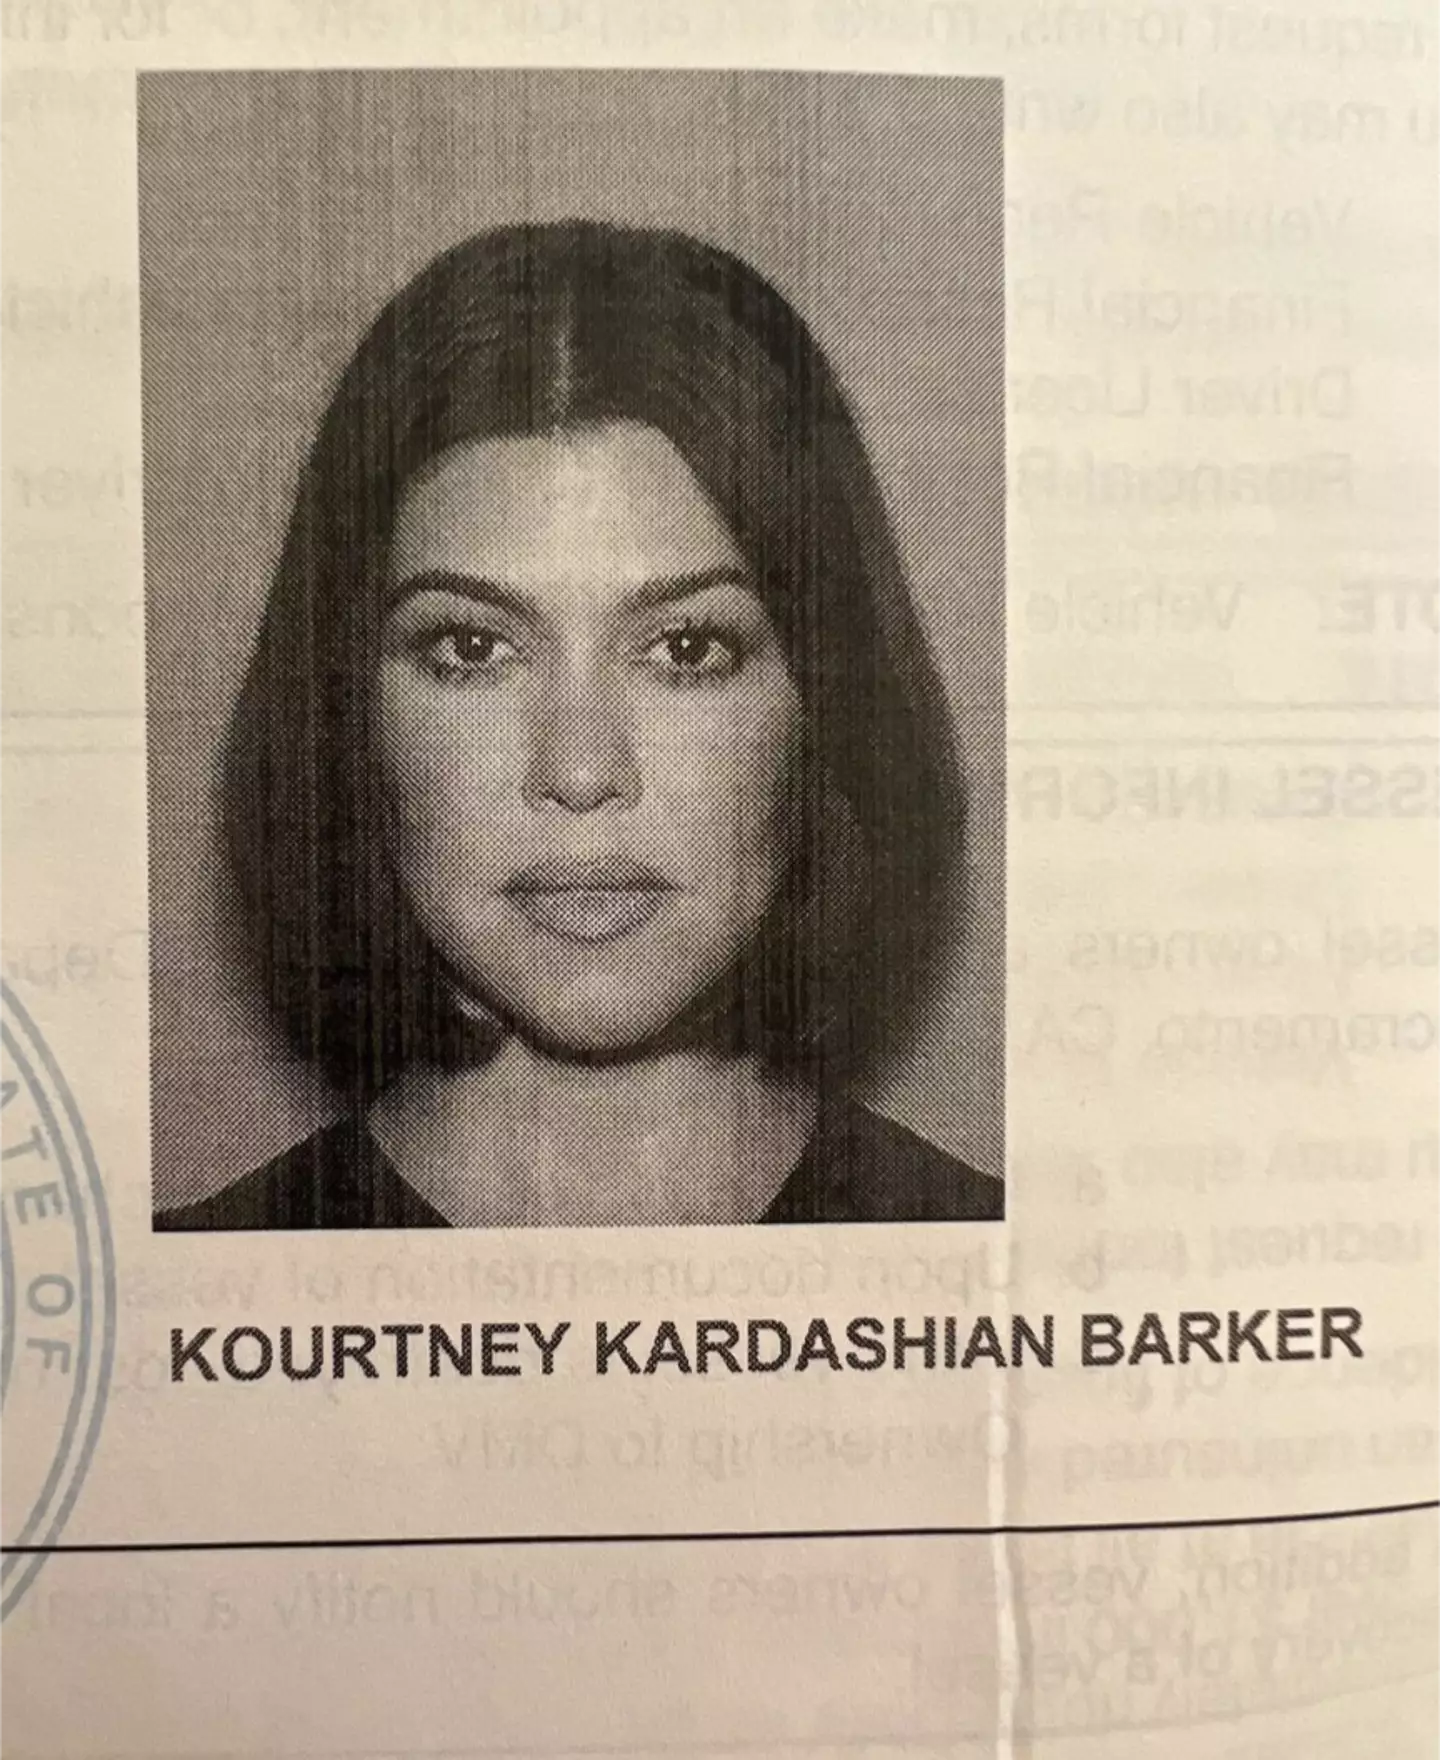 Kourtney Kardashian posted her new driver's license photo on Instagram on the very same day of the latest episode of The Kardashians.